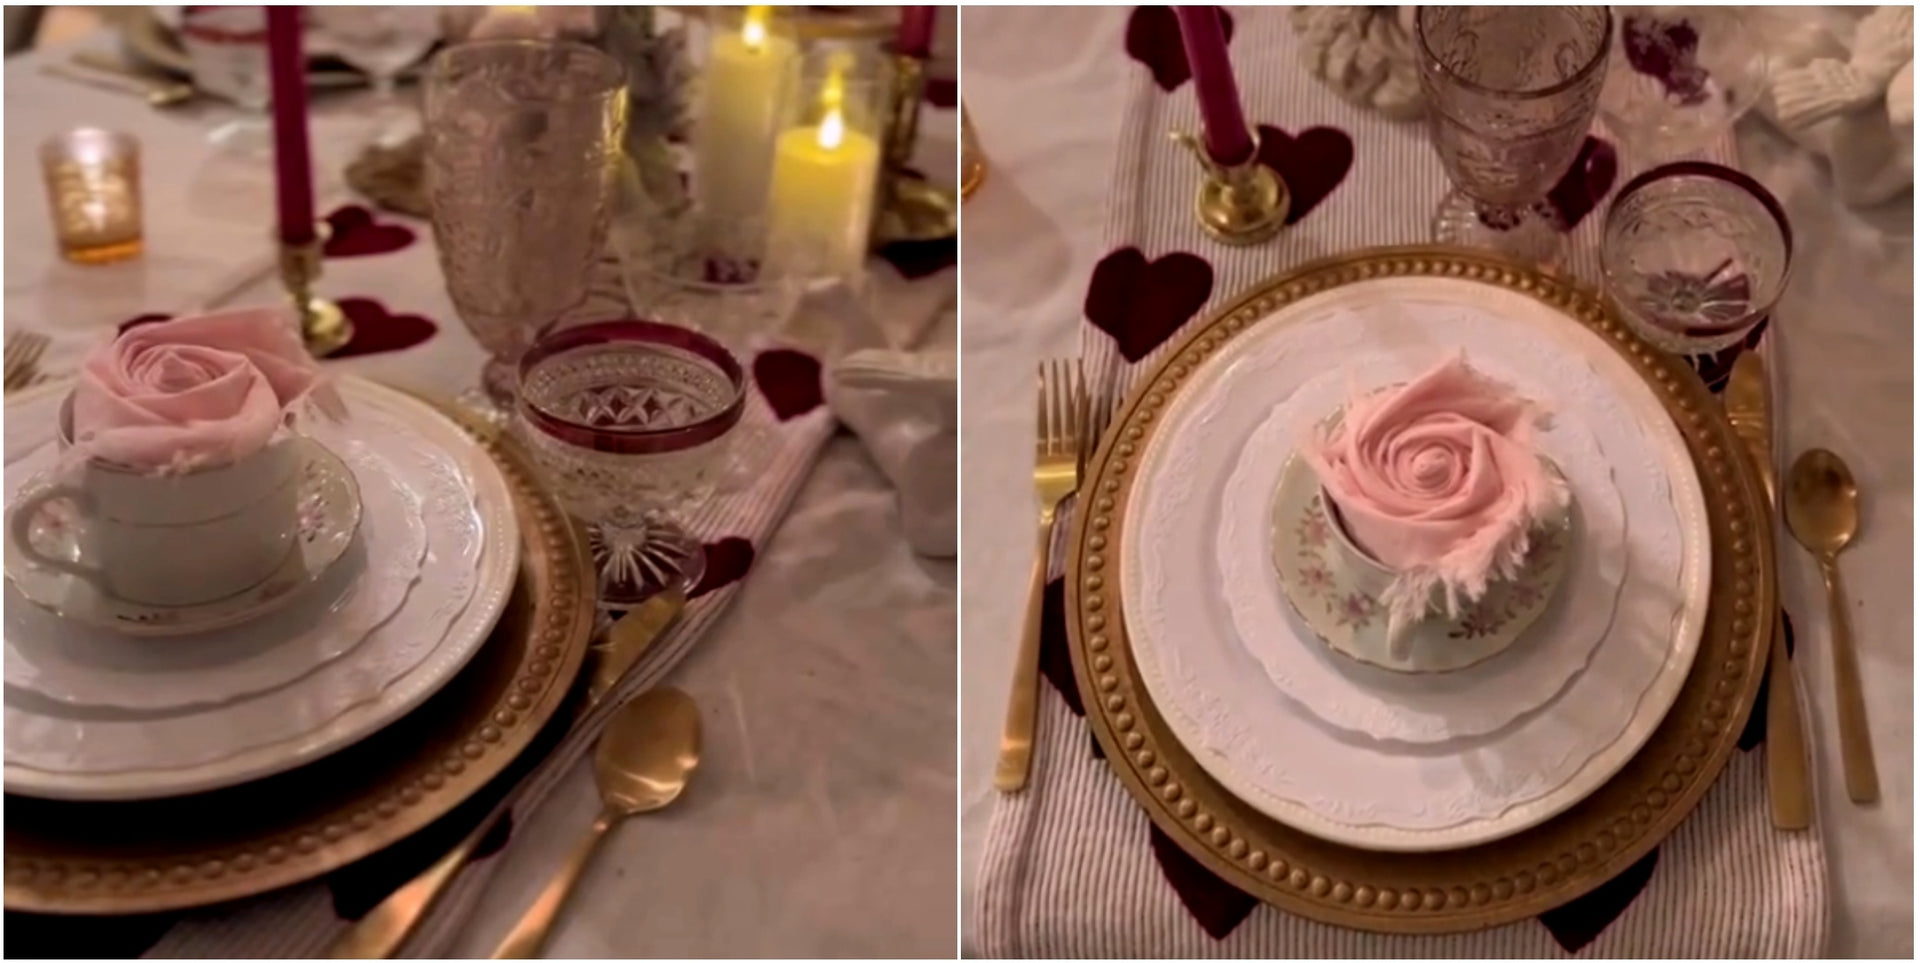 Enchanted Evening: Creating a Fairytale Valentine's Day Tablescape